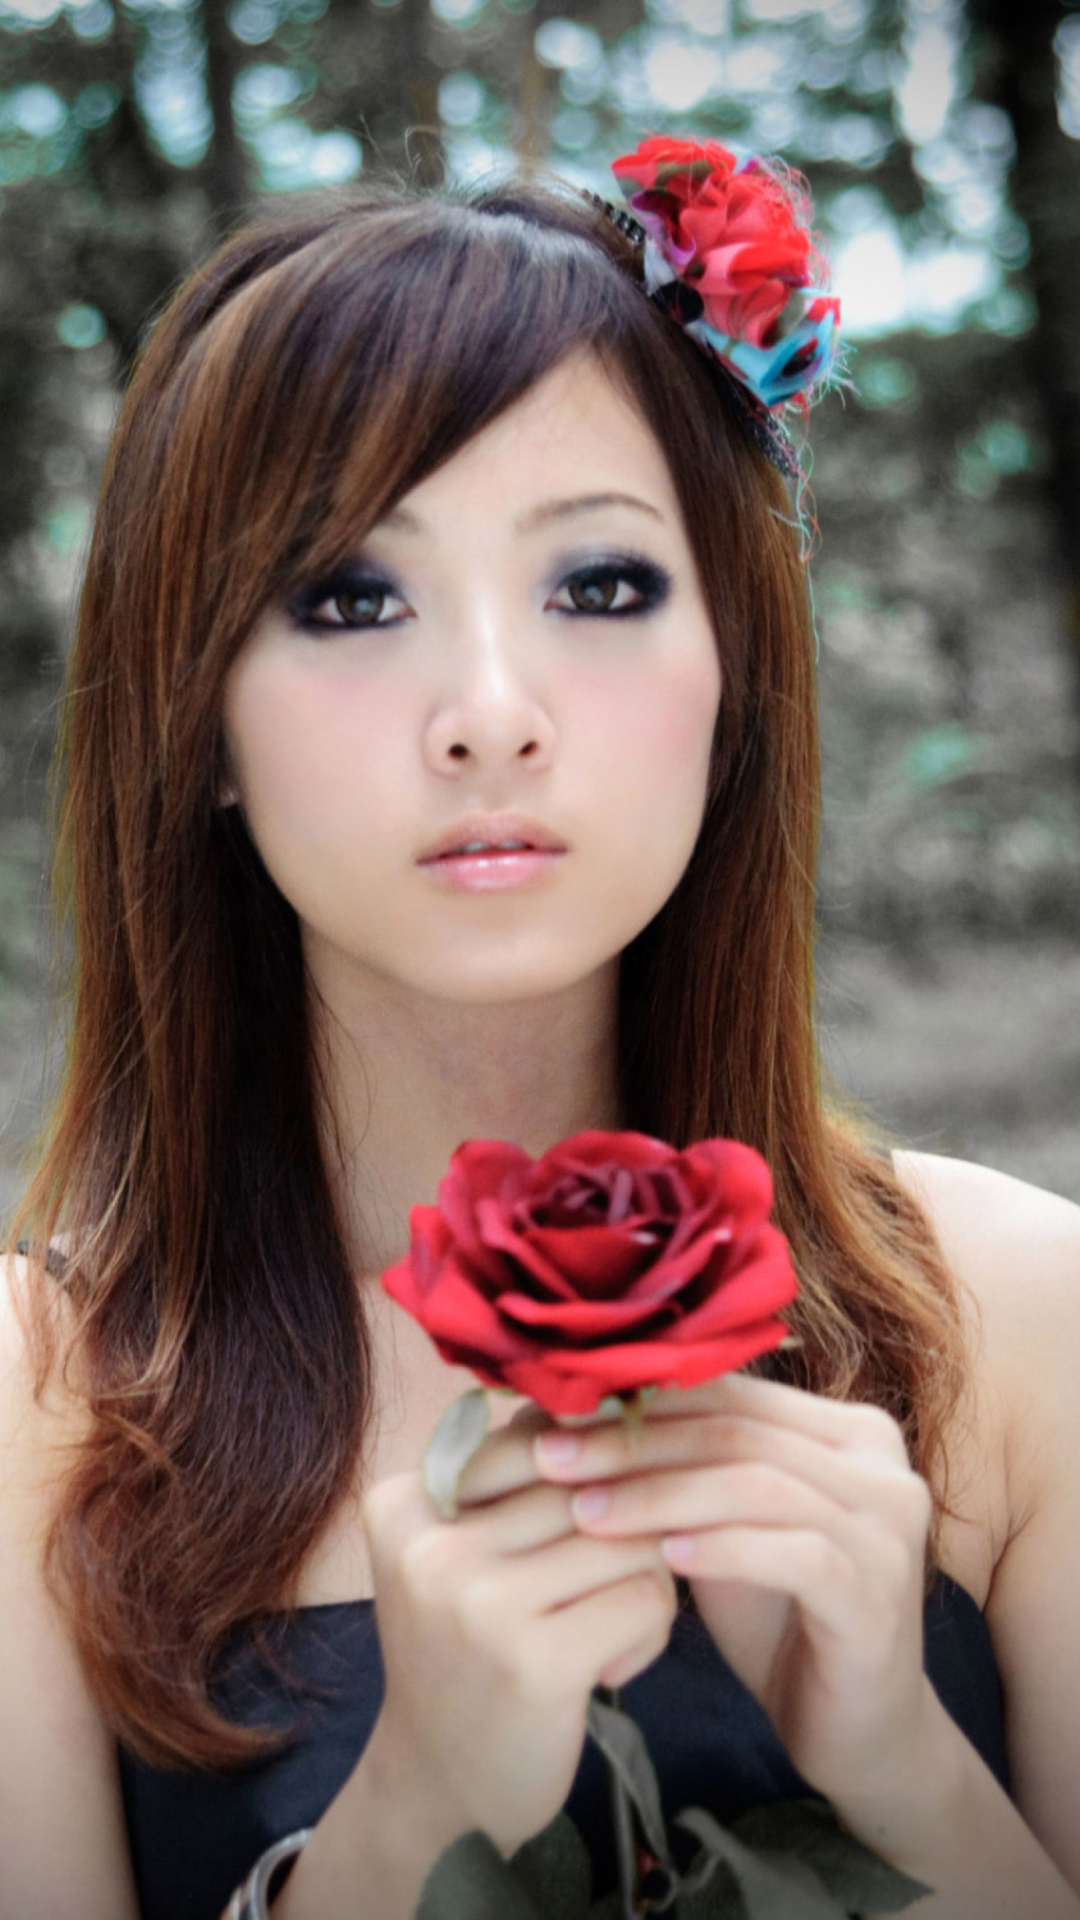 Das Asian Girl With Red Rose Wallpaper 1080x1920